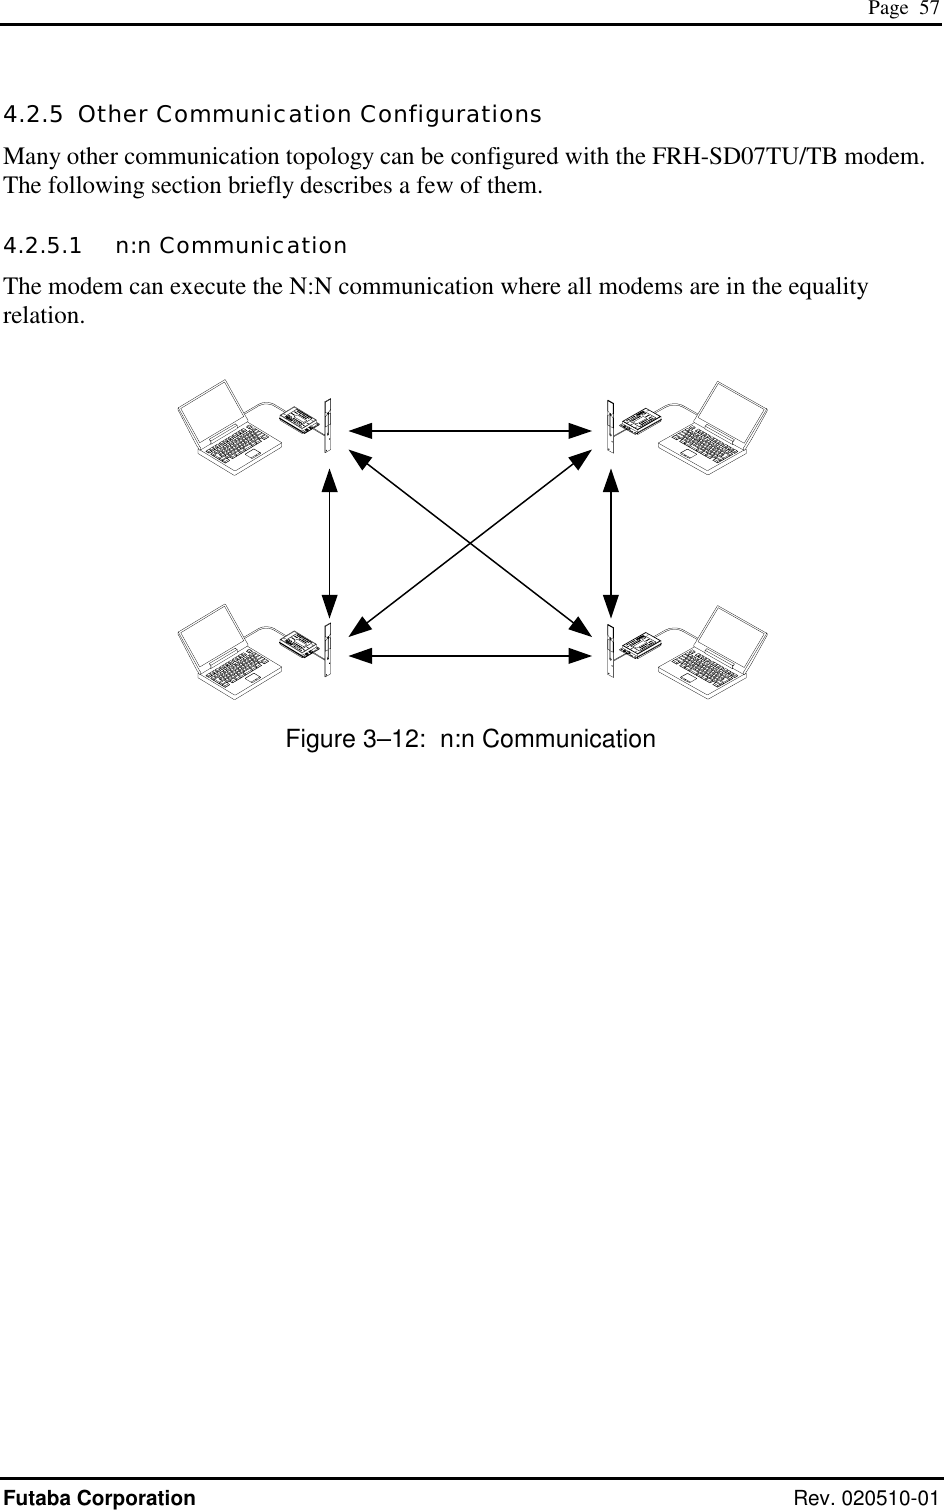  Page  57 Futaba Corporation Rev. 020510-01 4.2.5  Other Communication Configurations Many other communication topology can be configured with the FRH-SD07TU/TB modem. The following section briefly describes a few of them. 4.2.5.1   n:n Communication The modem can execute the N:N communication where all modems are in the equality relation.                                                                                               Figure 3–12:  n:n Communication 